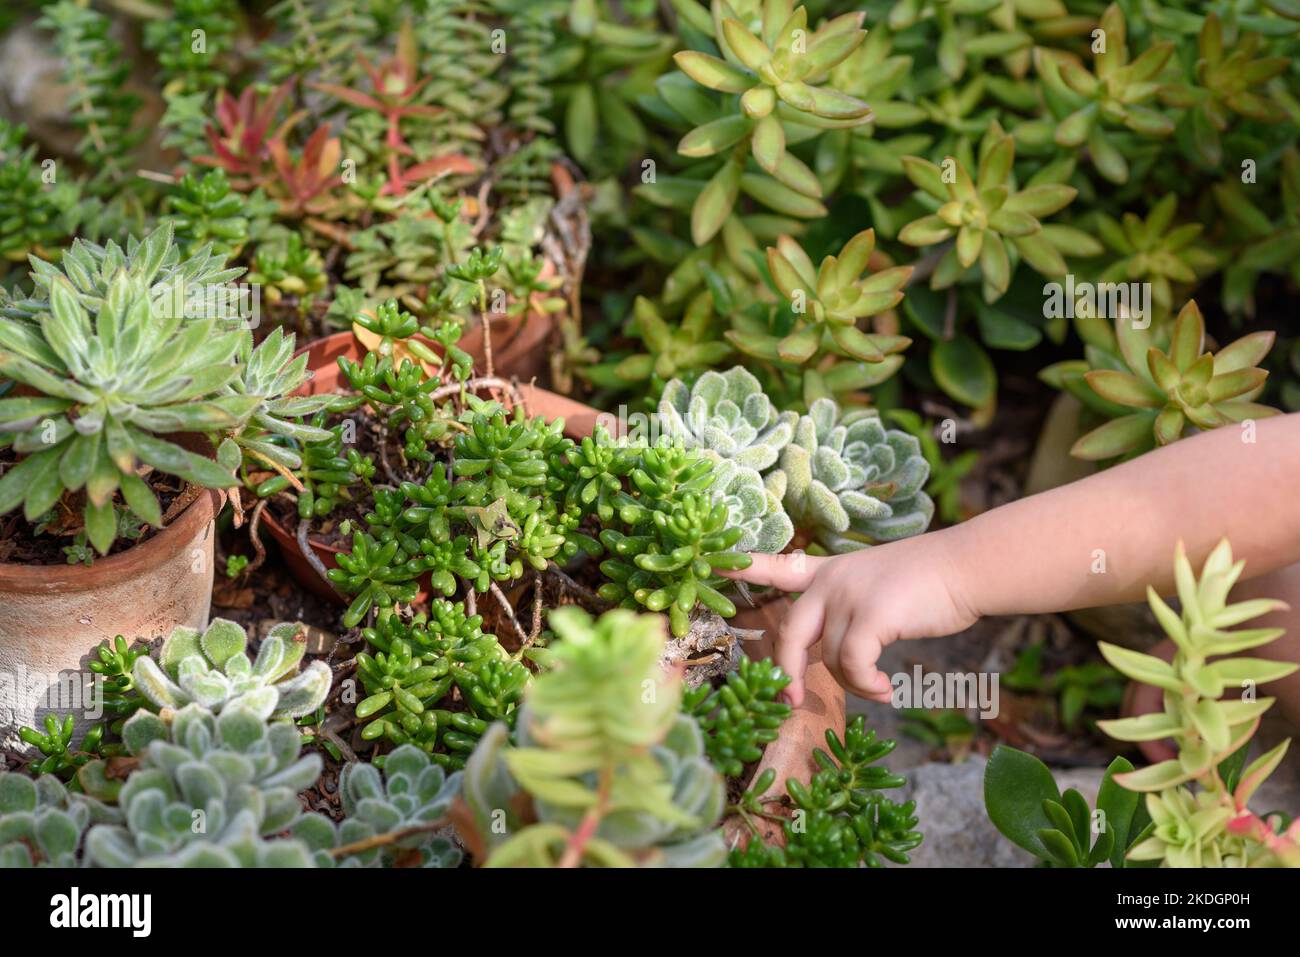 Potted Succulent Plants In A Garden. Child Hand Pointing At Succulent Plants. Stock Photo